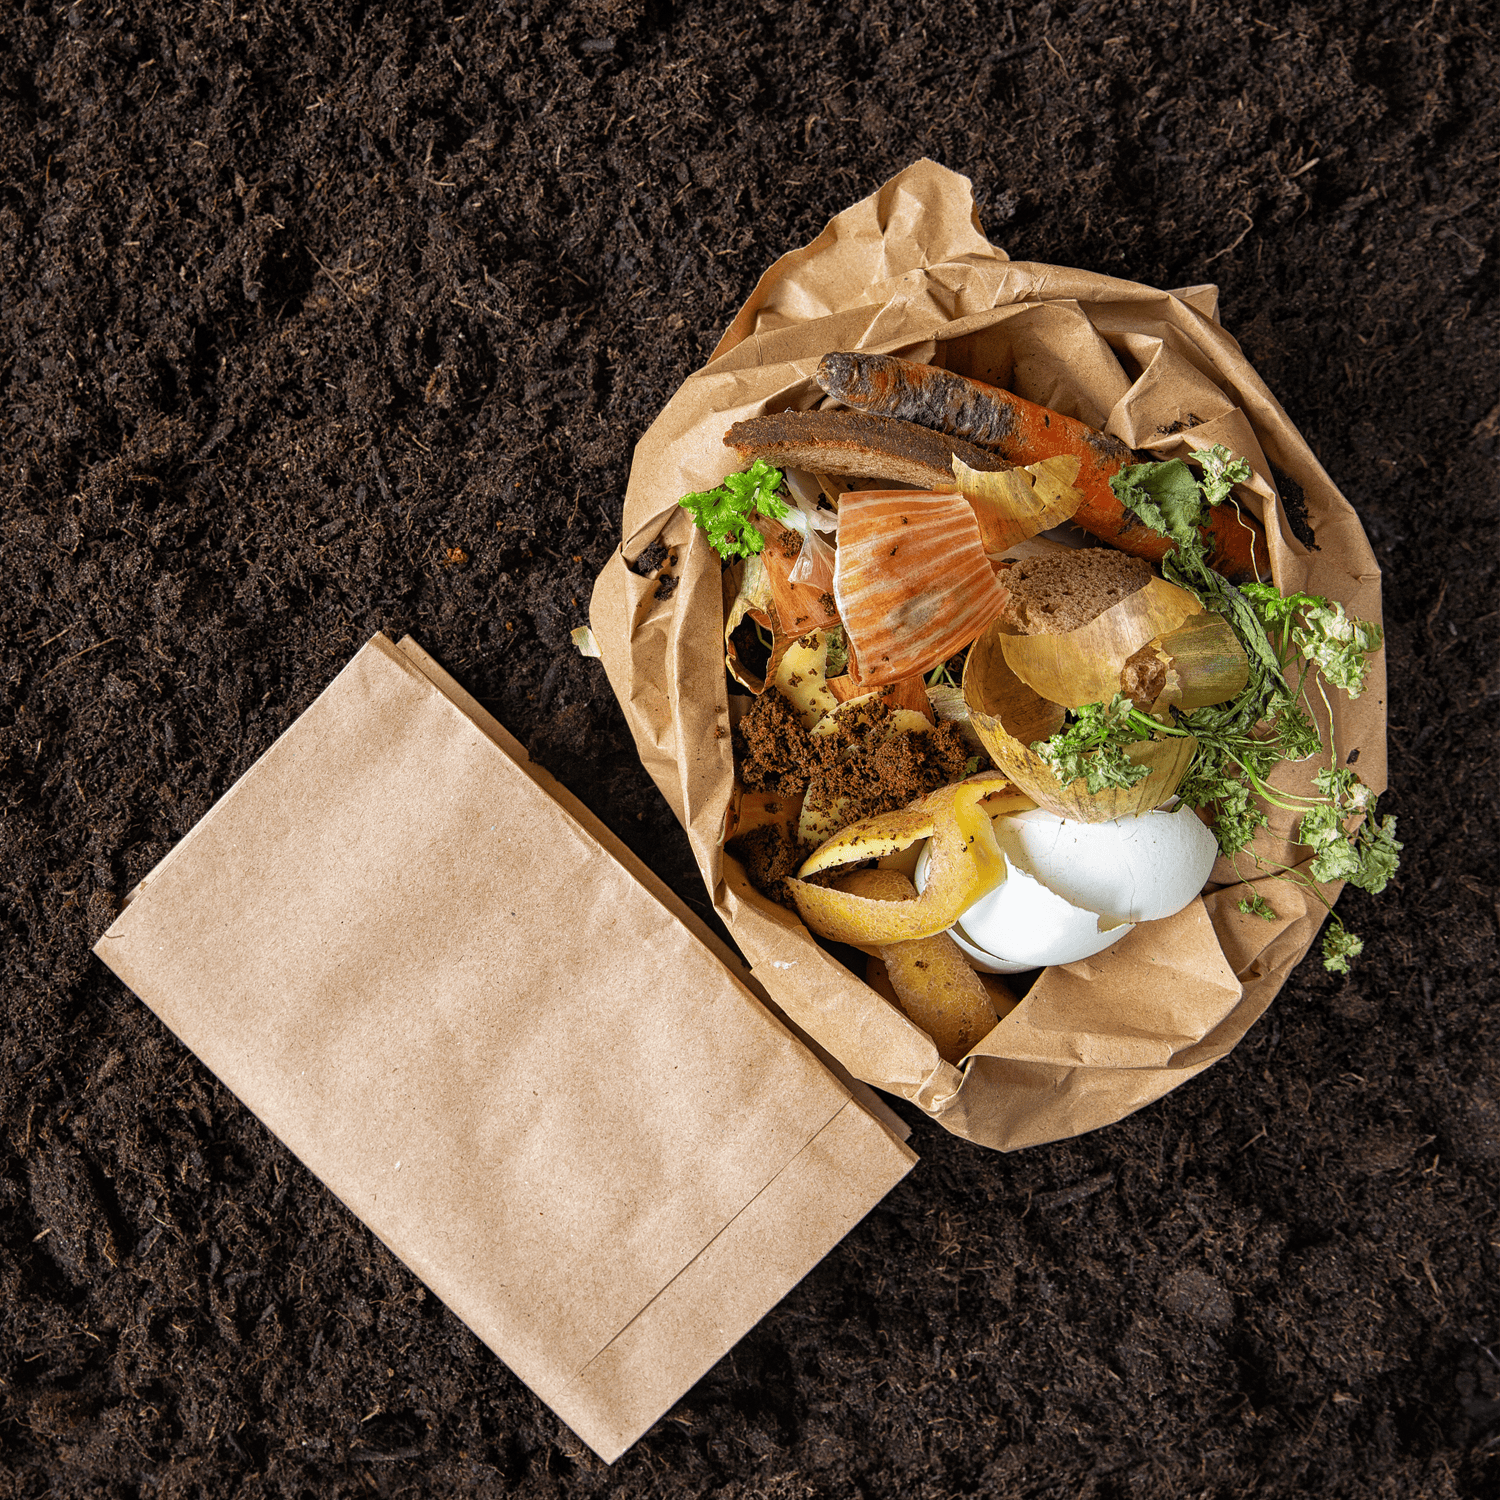 Brown paper bag used for composting